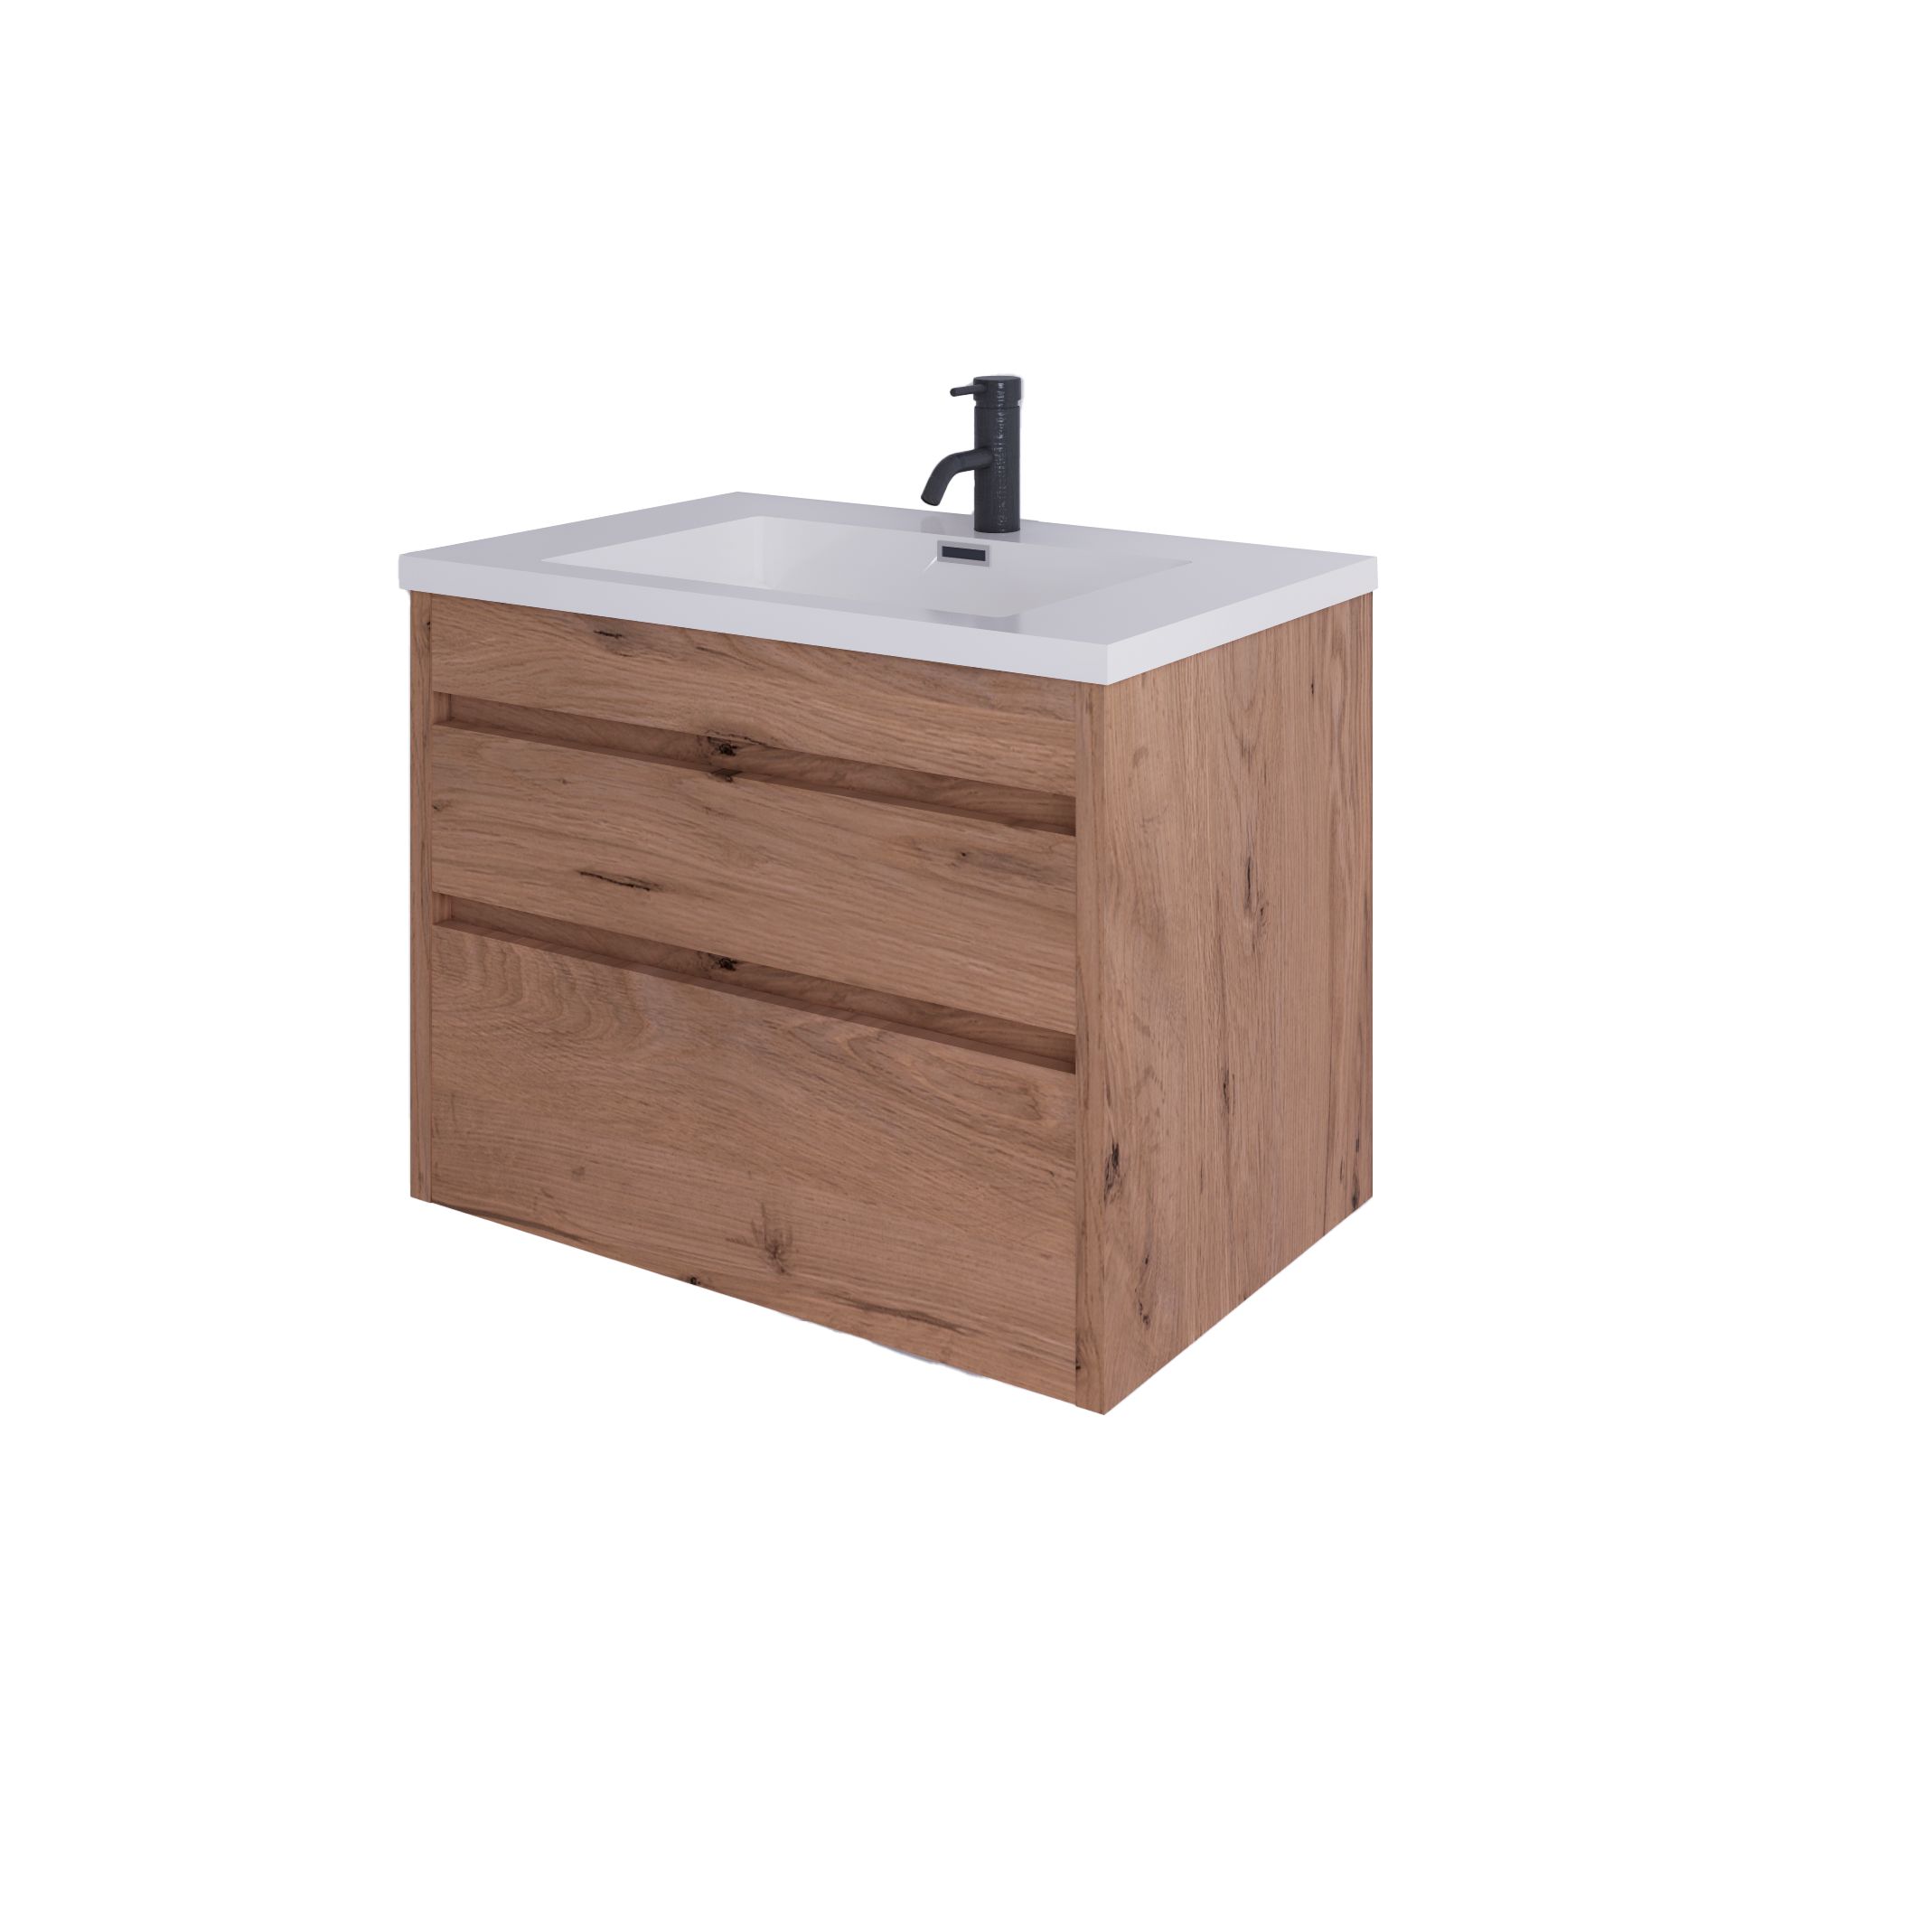 LUX 750 2 DRAWER WALL-HUNG VANITY